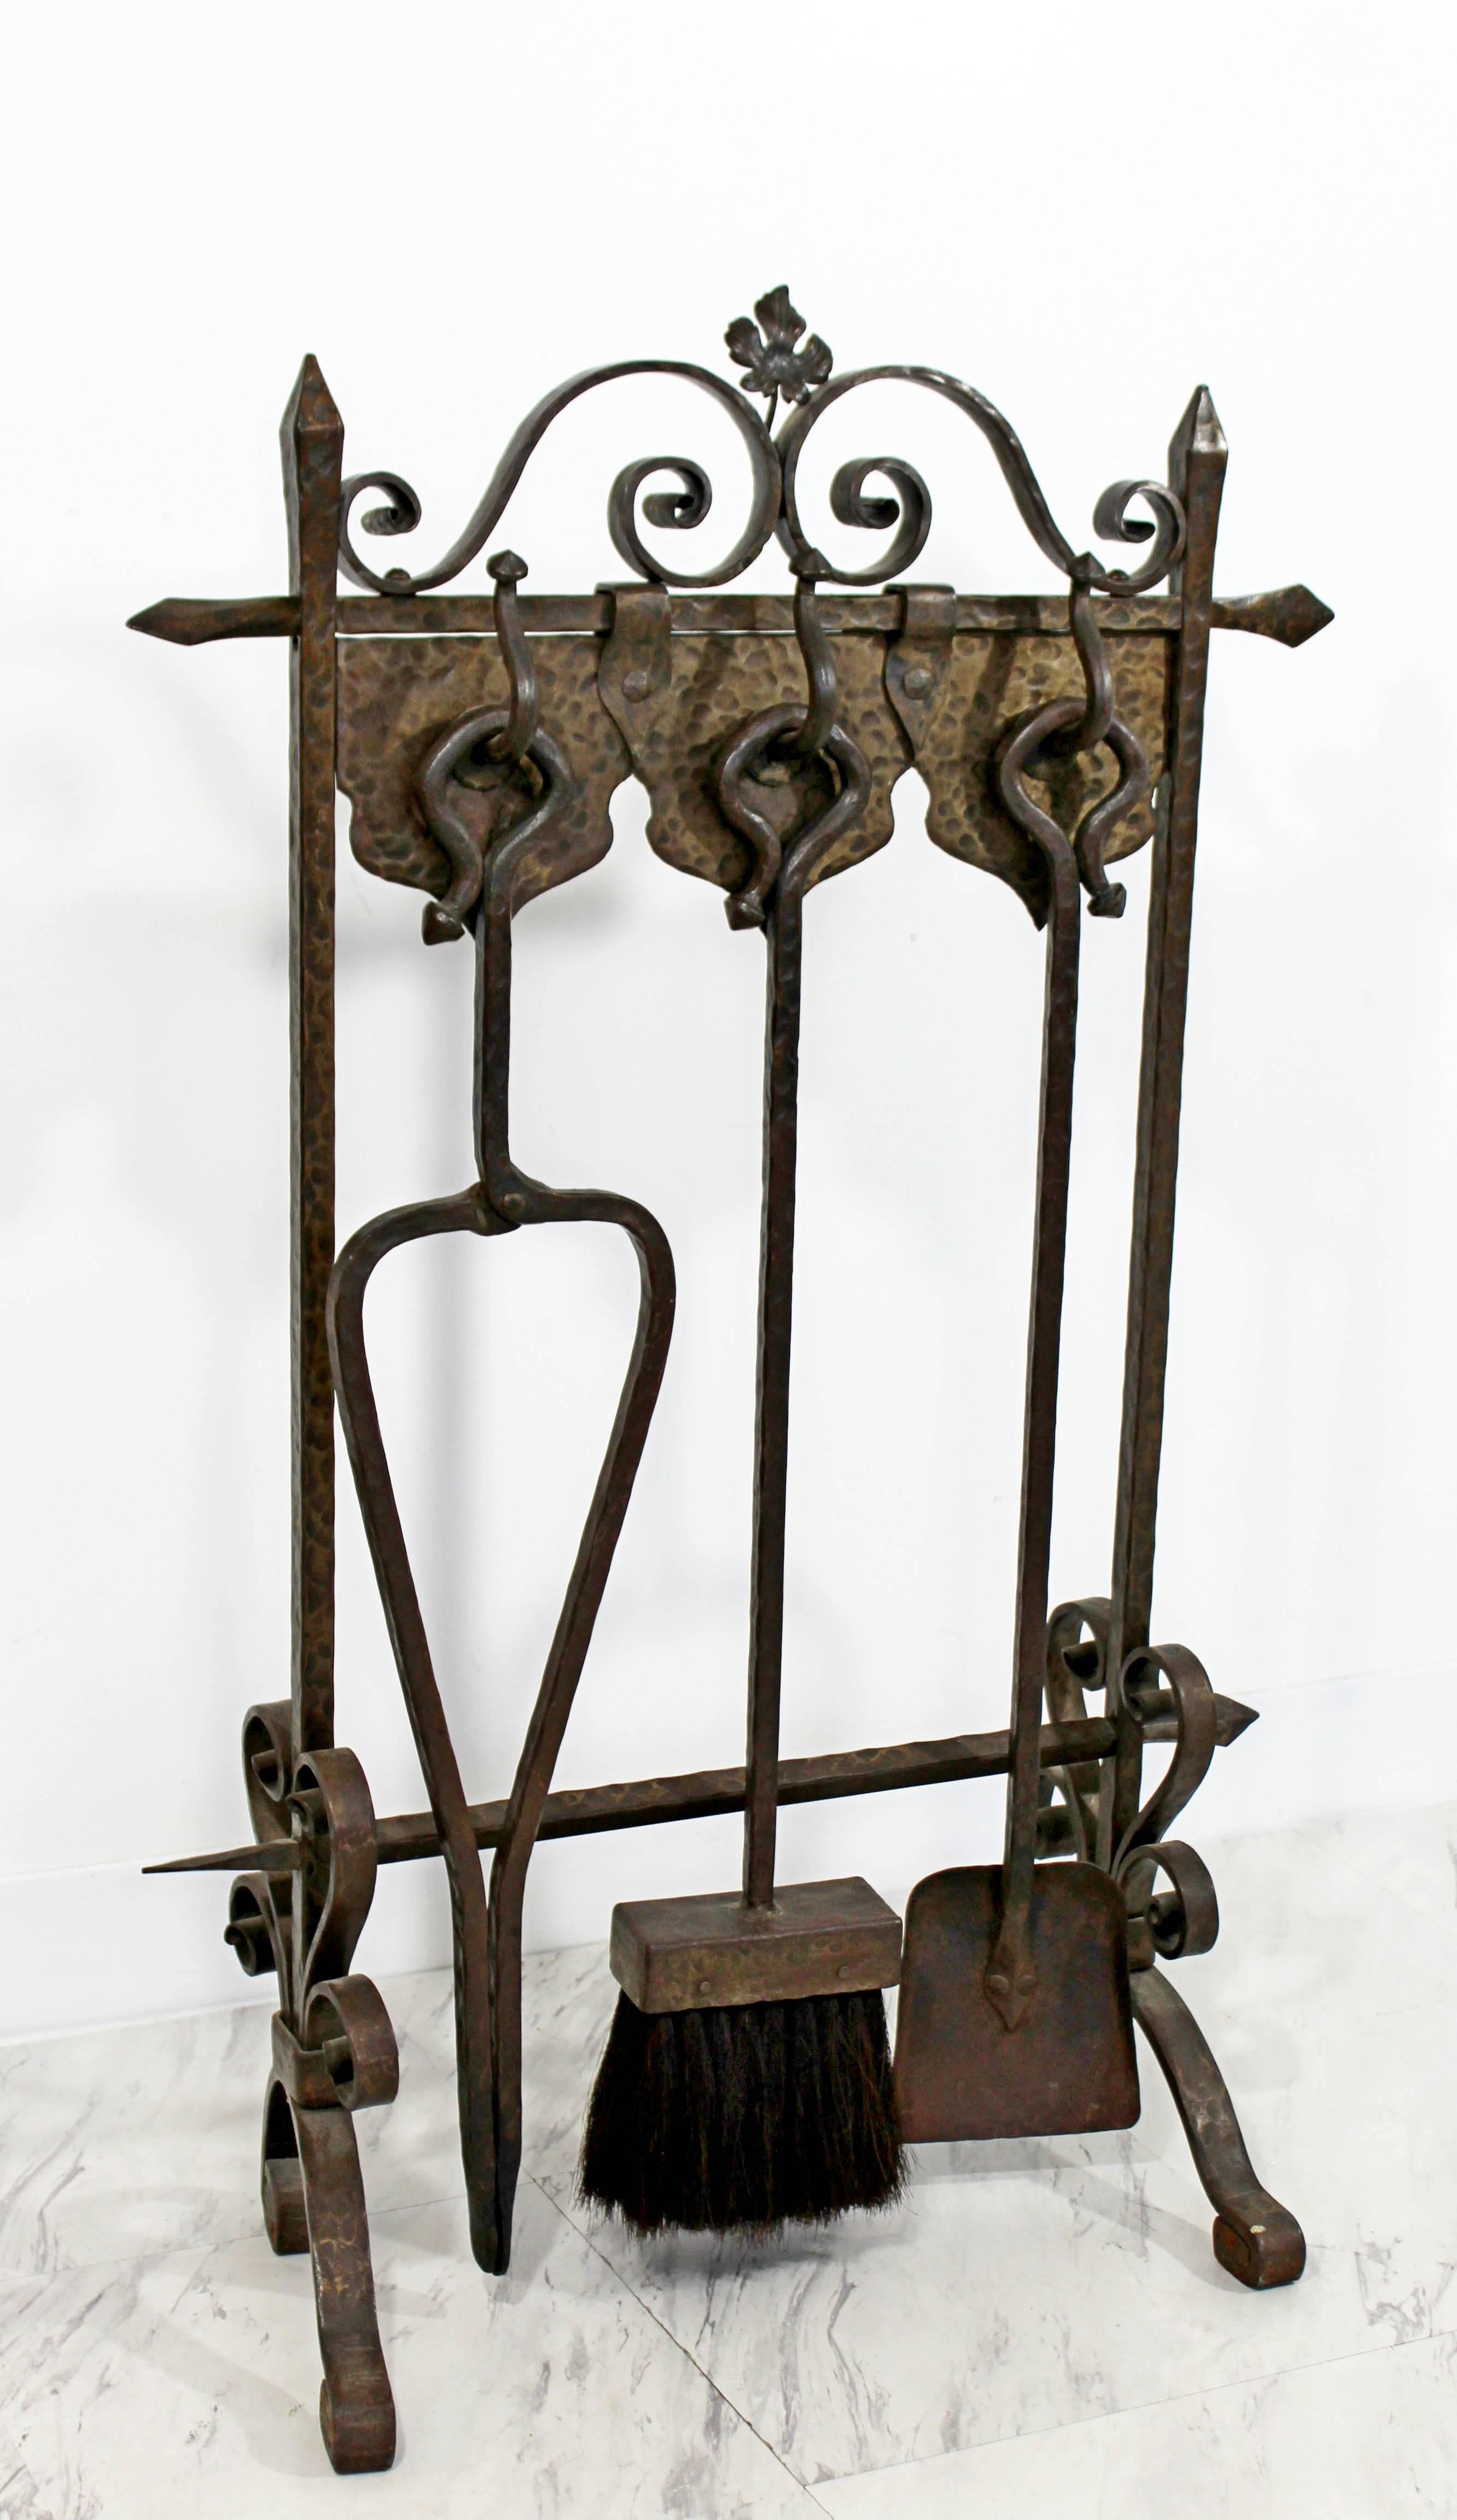 For your consideration is an incredibly rare French Art Deco hand-forged, wrought iron, fireplace set that includes a screen, tools and andirons. In excellent condition. The dimensions of the tool set is 23